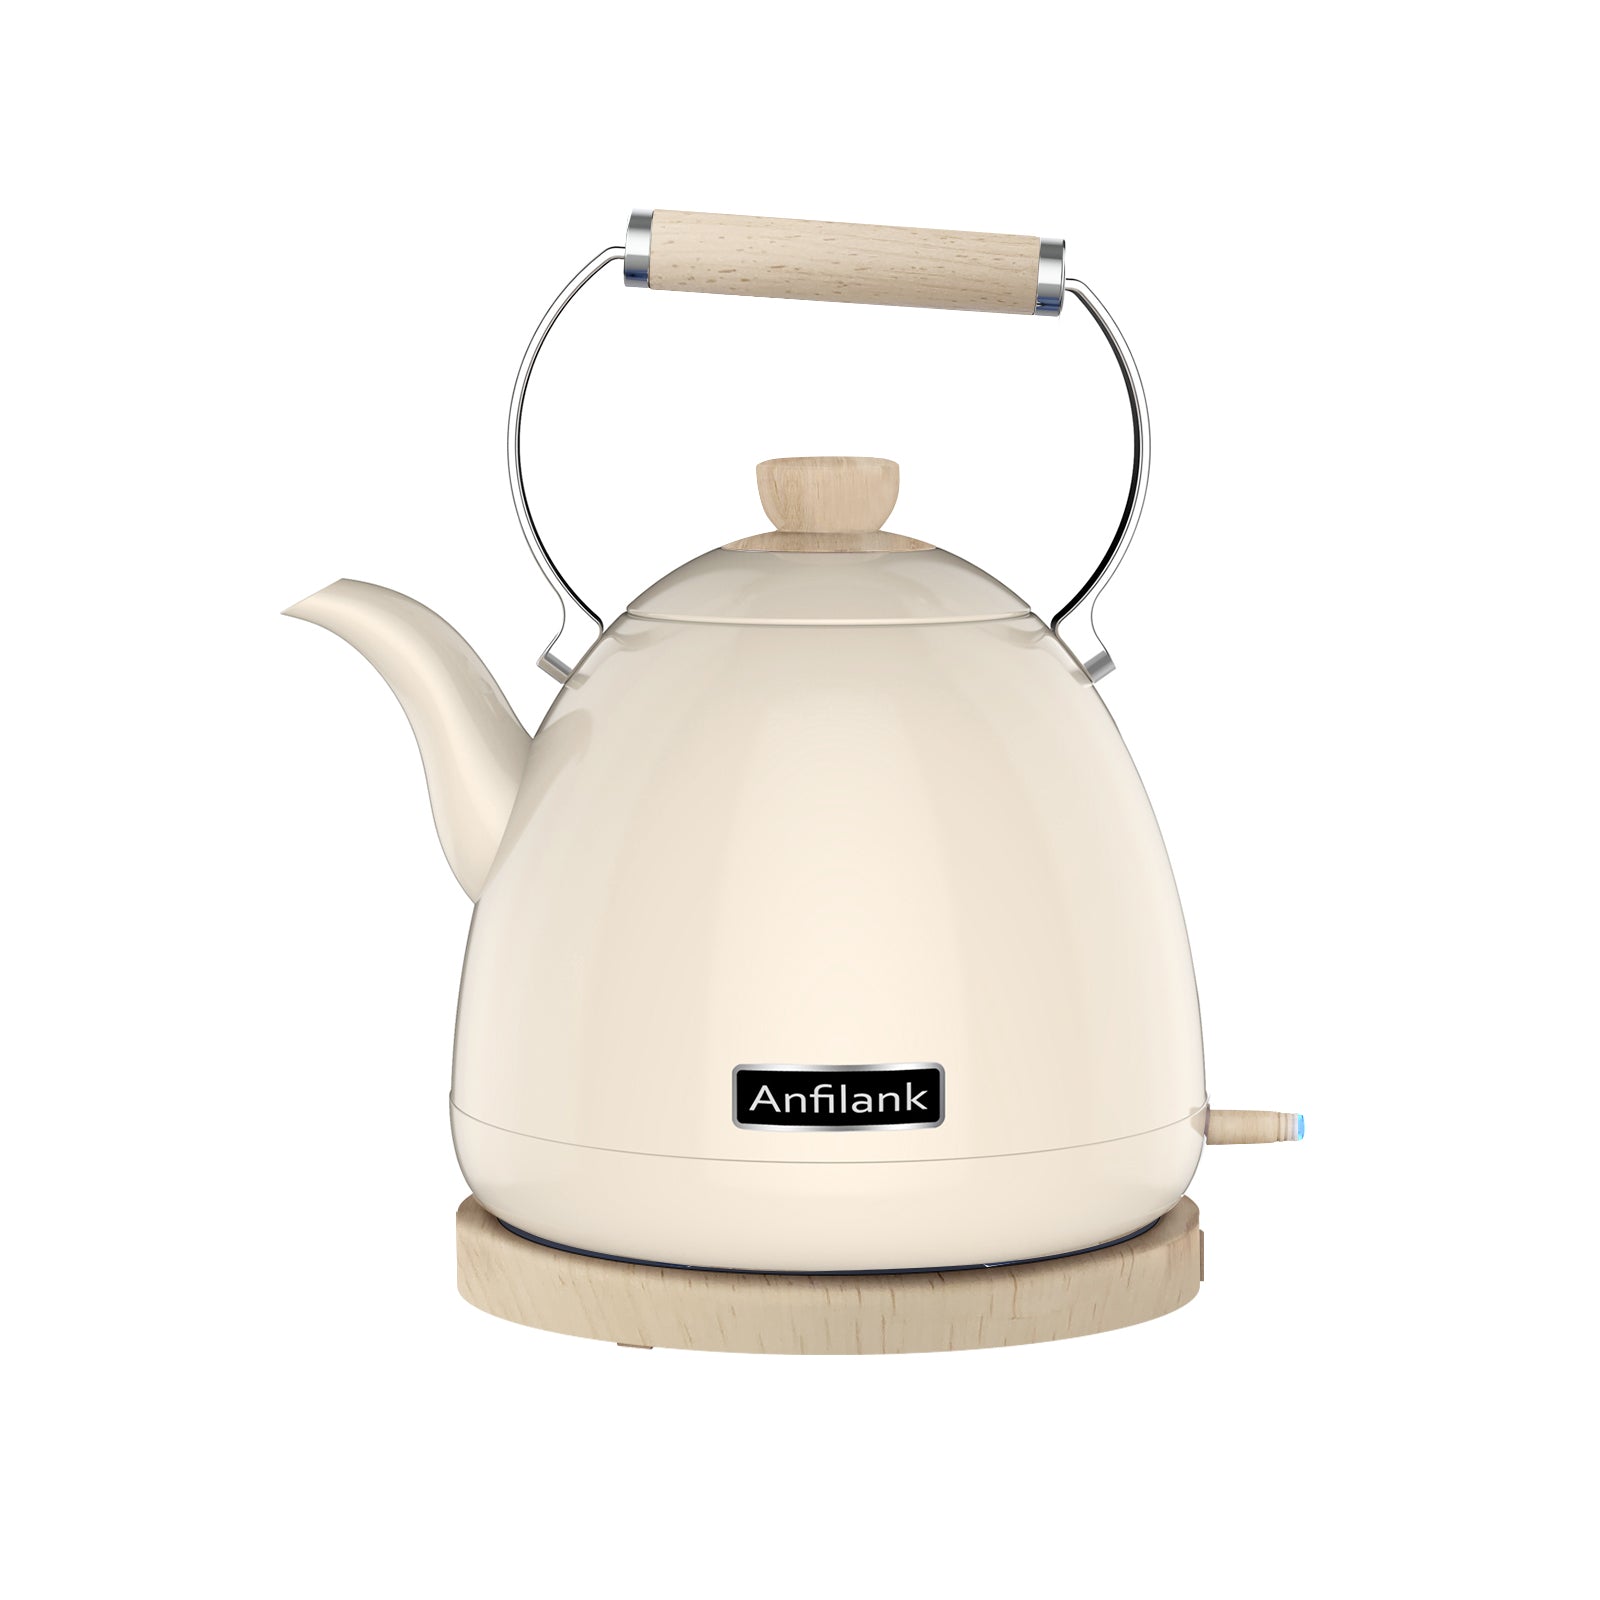 Anfilank 1.7L Cordless Electric Kettle, Stainless Steel Tea Kettle with Water window And LED Light, Auto Shut-off, JK-150